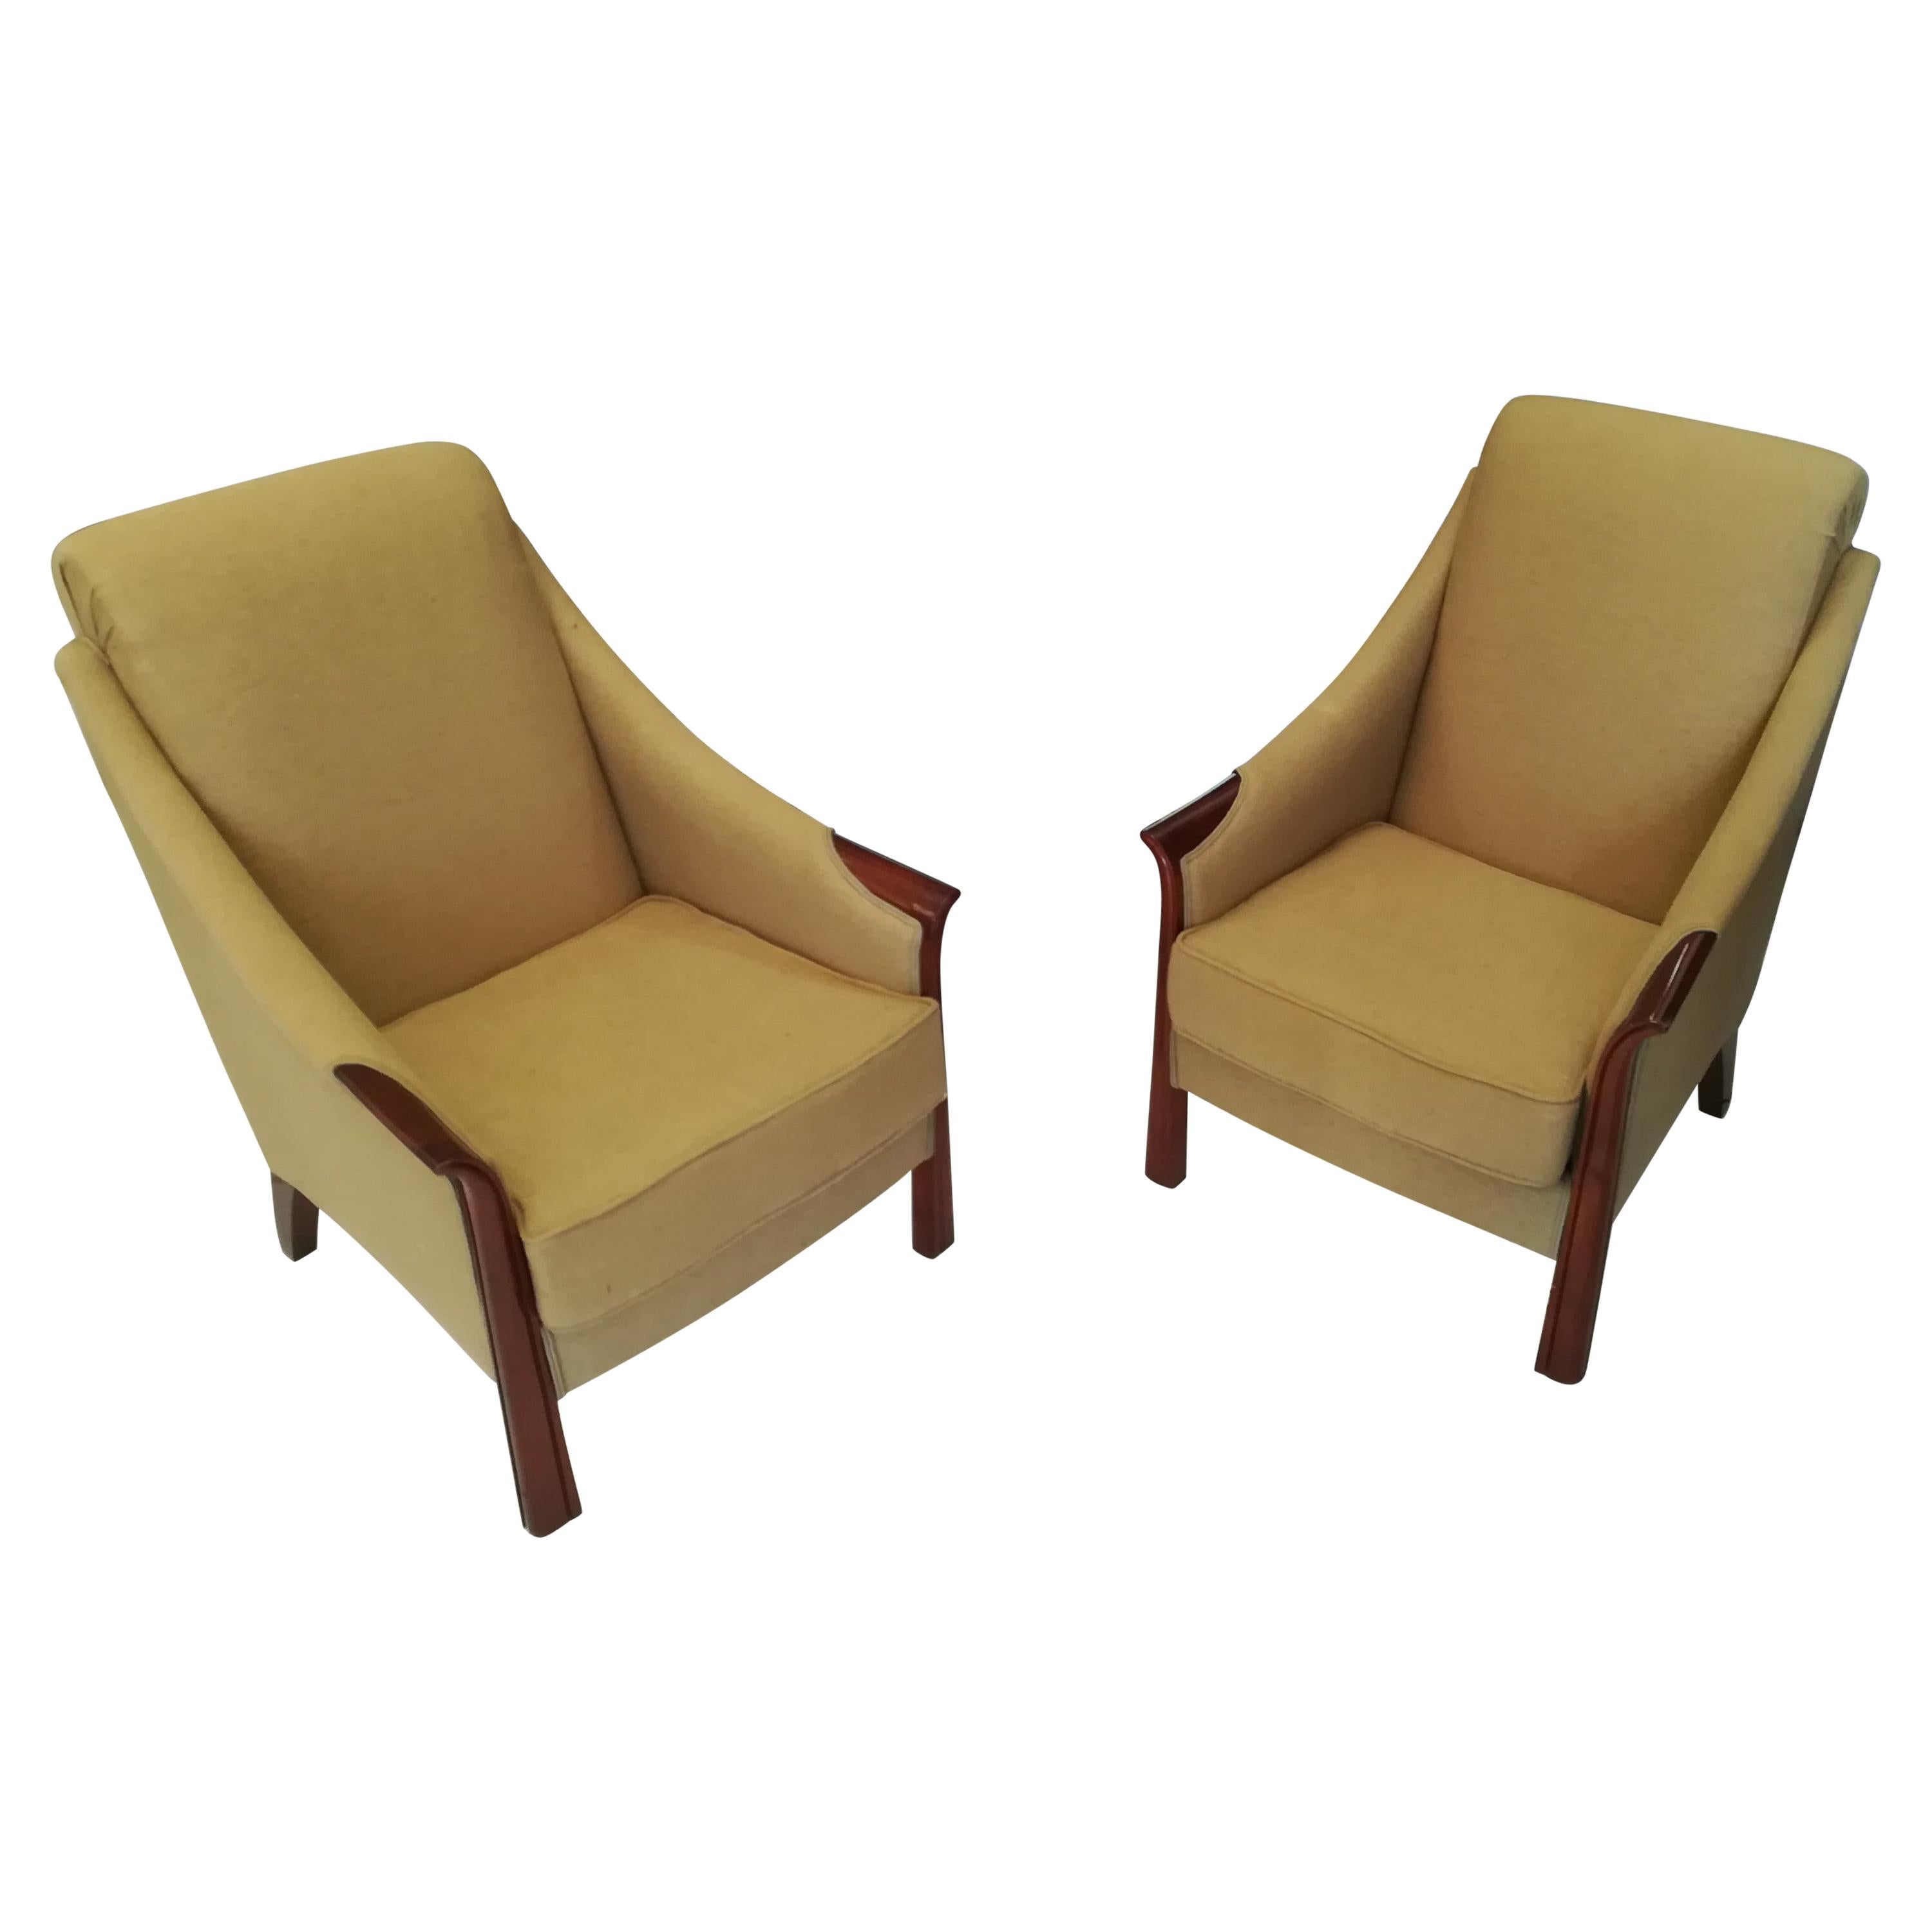 Pair of Art Deco Armchairs in the style of Pierre Chareau, circa 1930 For Sale